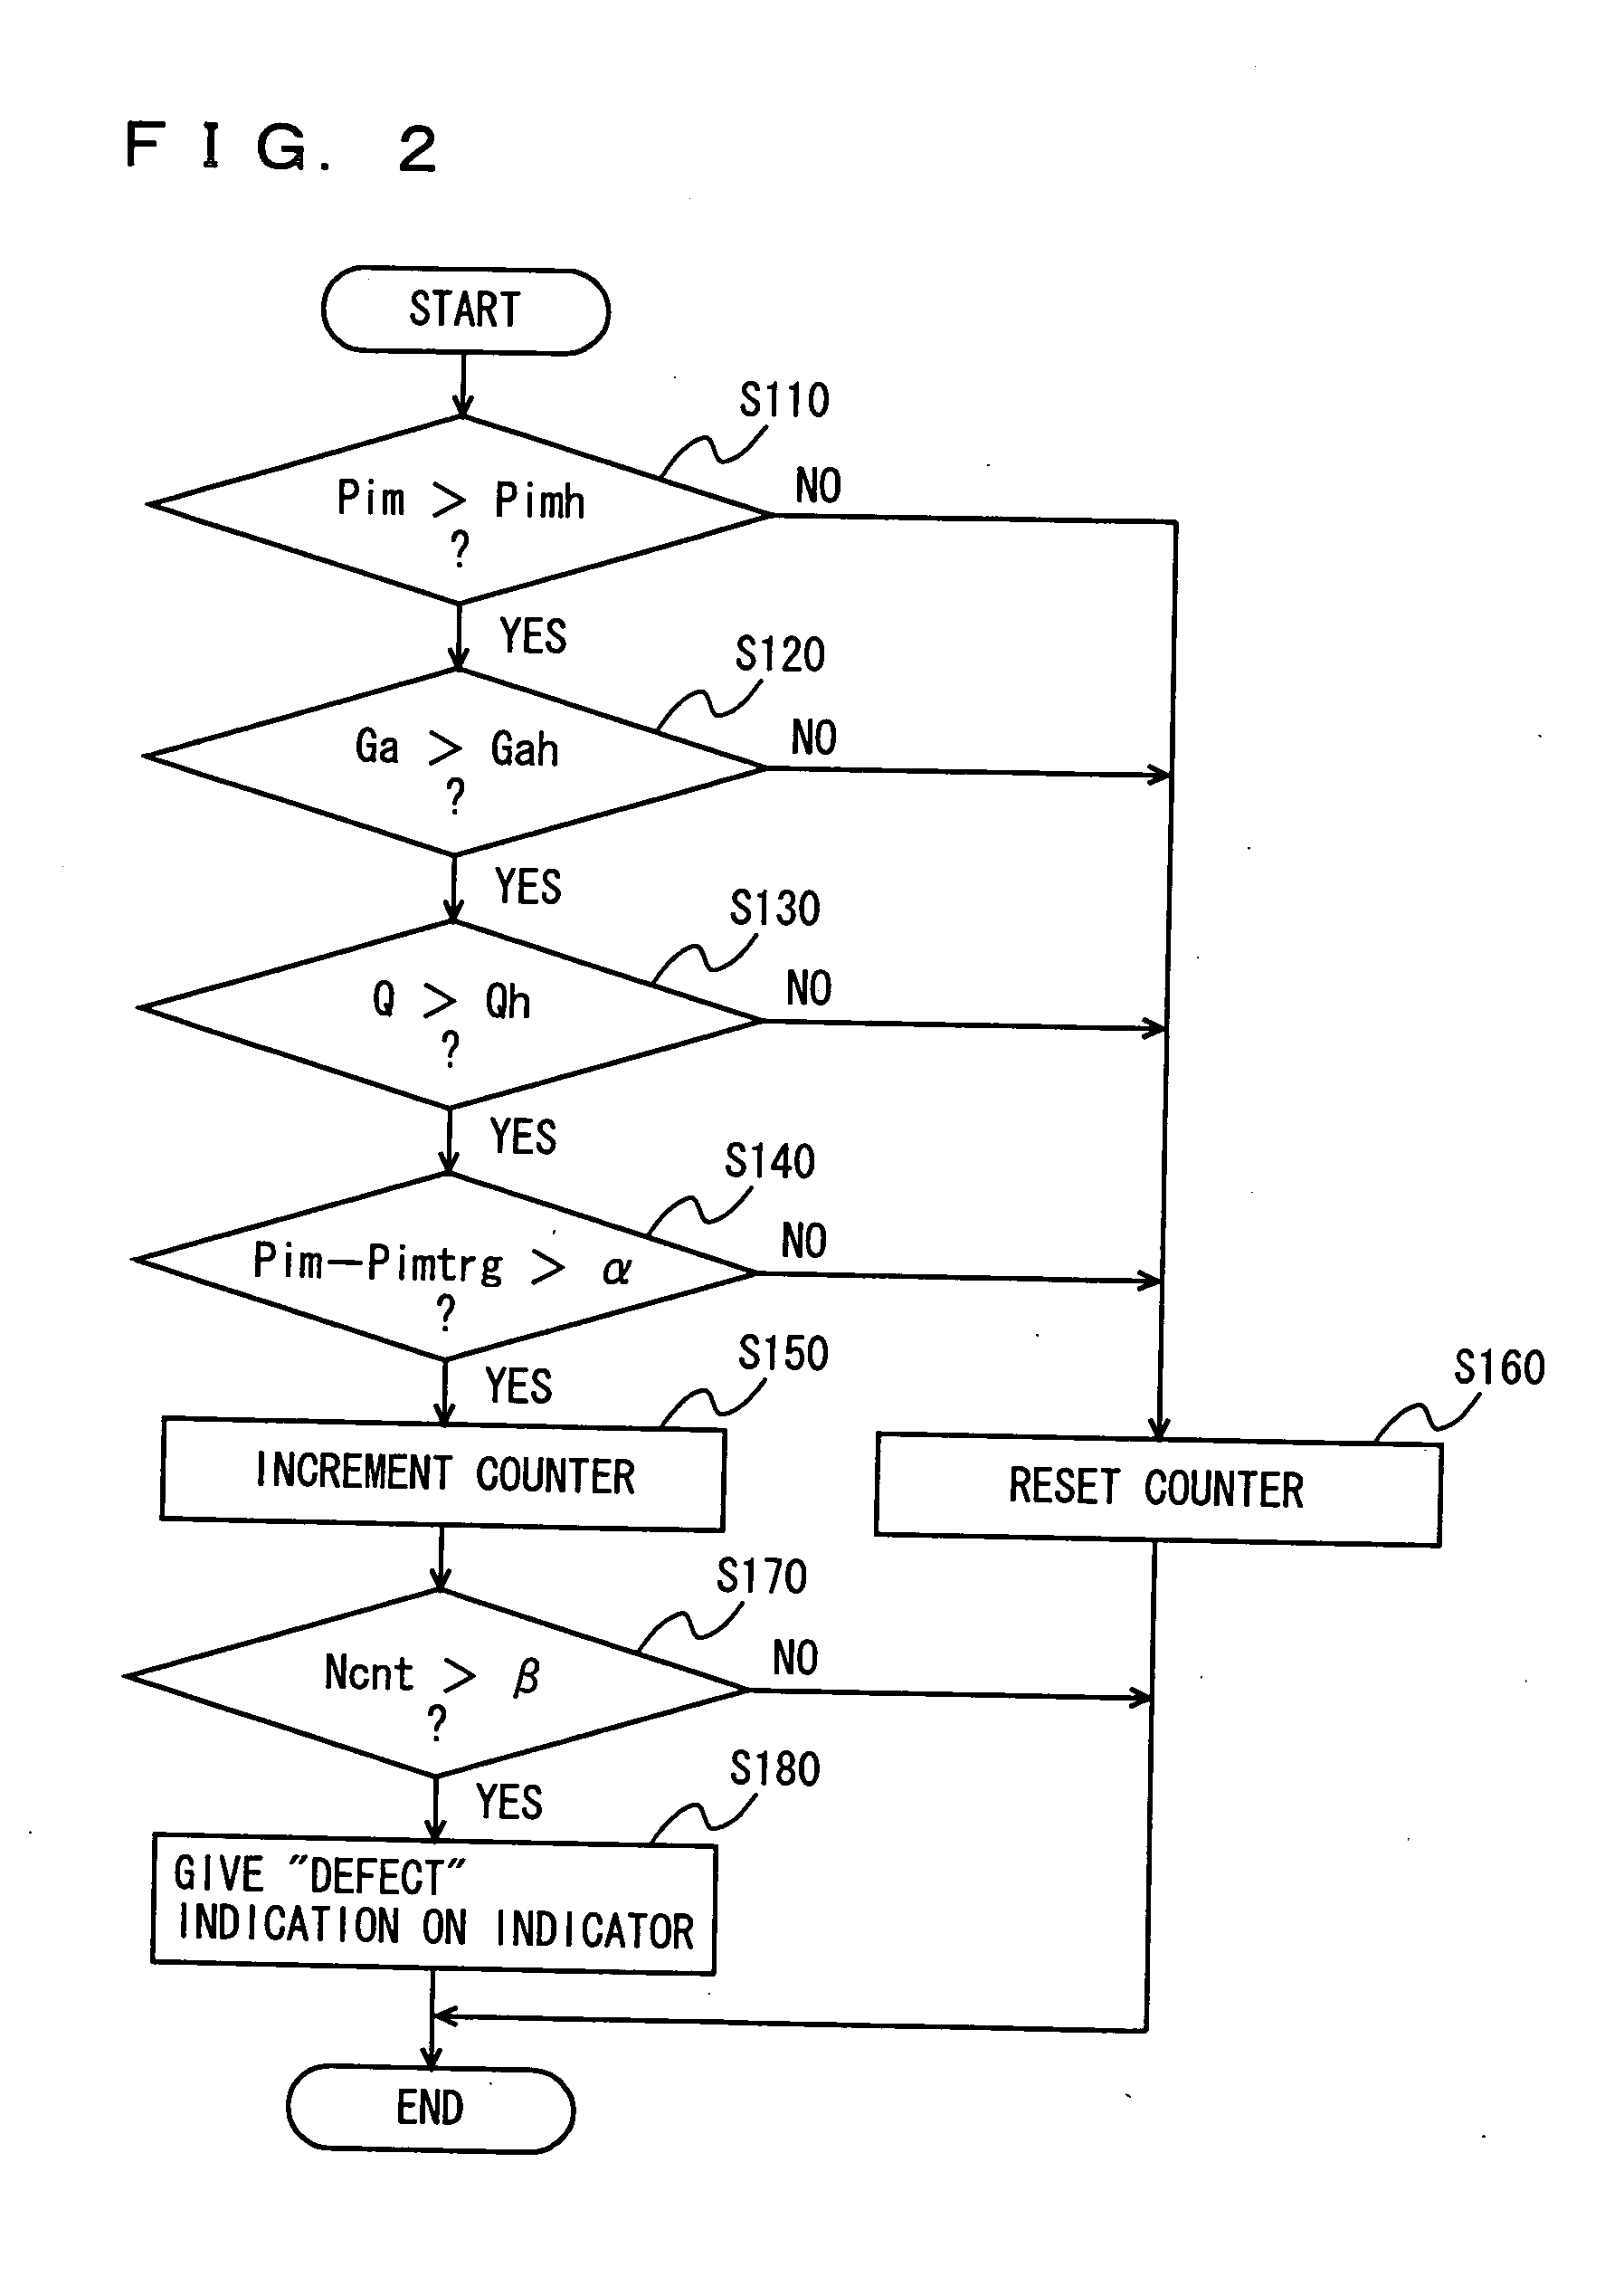 Defect determining device for turbo charger